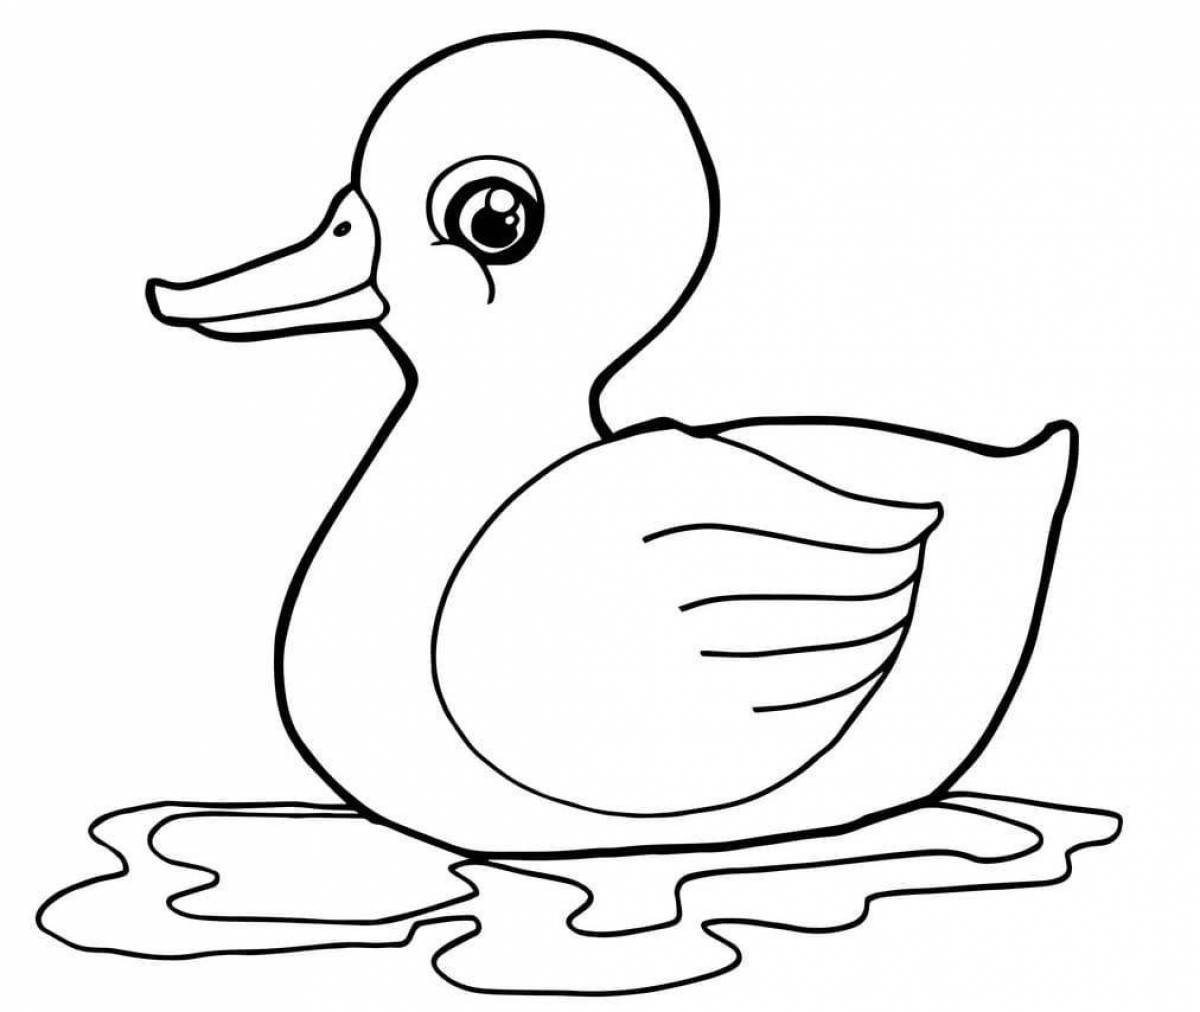 Exquisite duck coloring book for kids